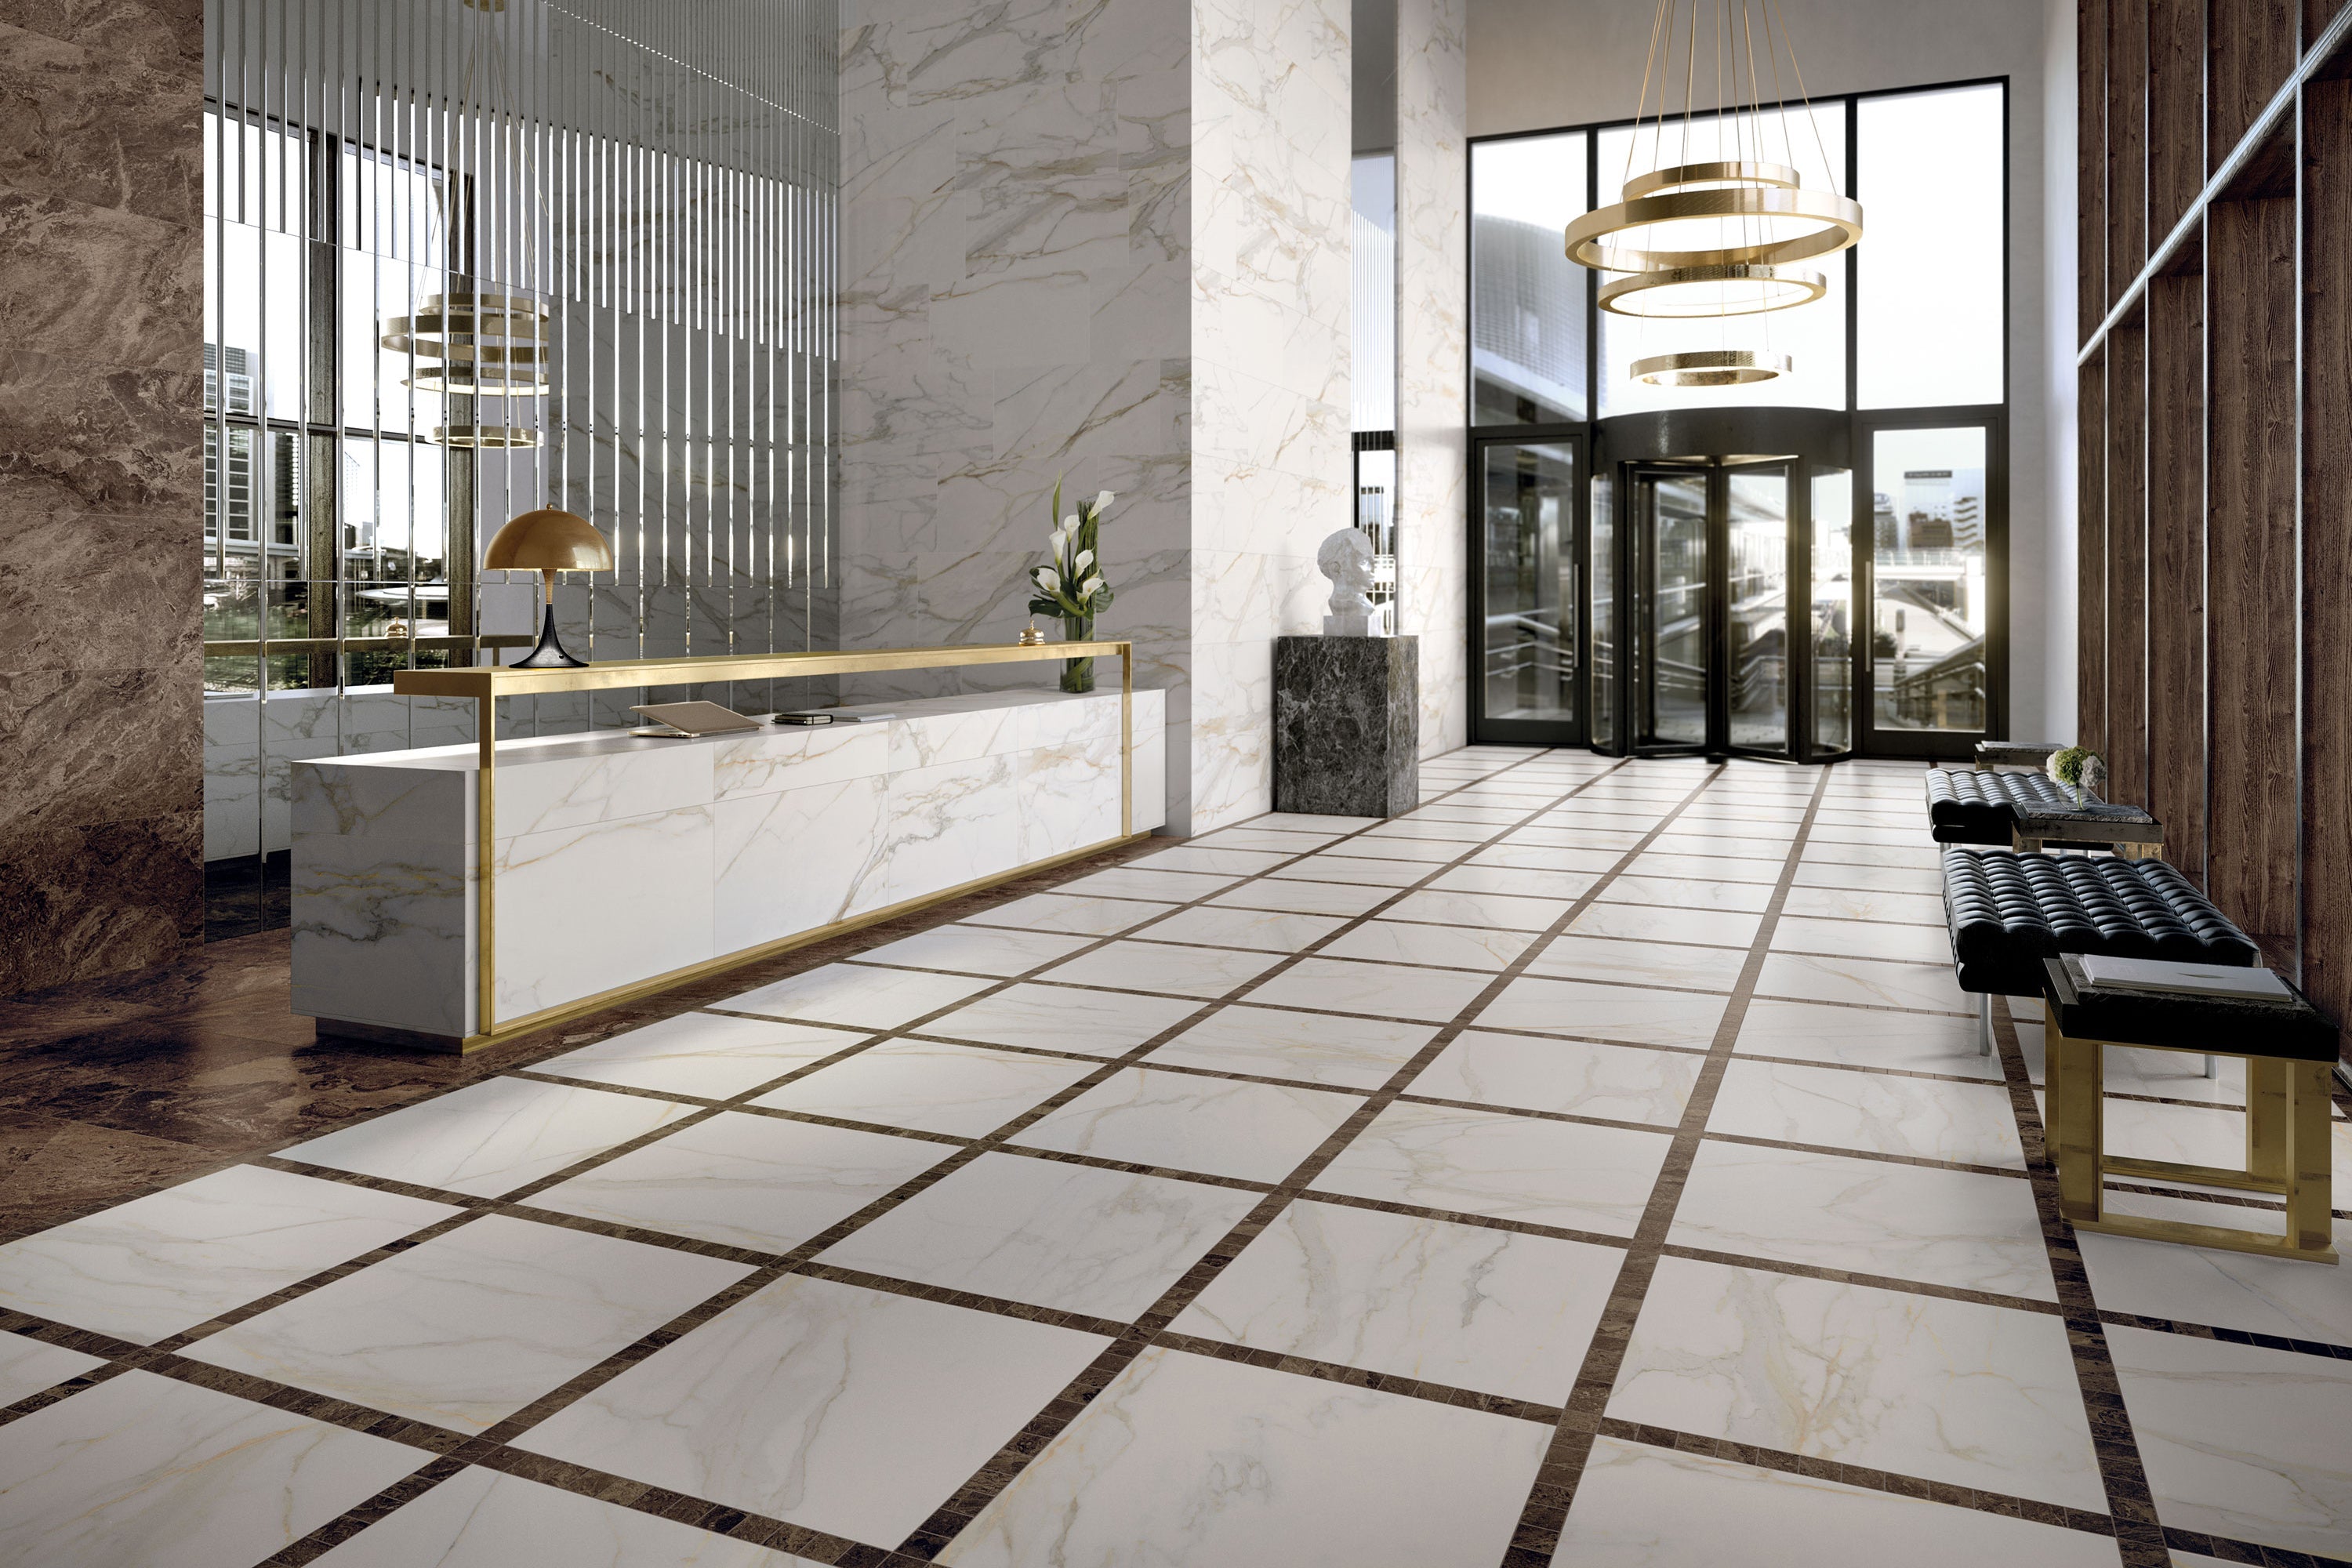 Luxurious Charme porcelain tile collection by Surface Group showcased in a modern bathroom setting with marble effect and gold accents.